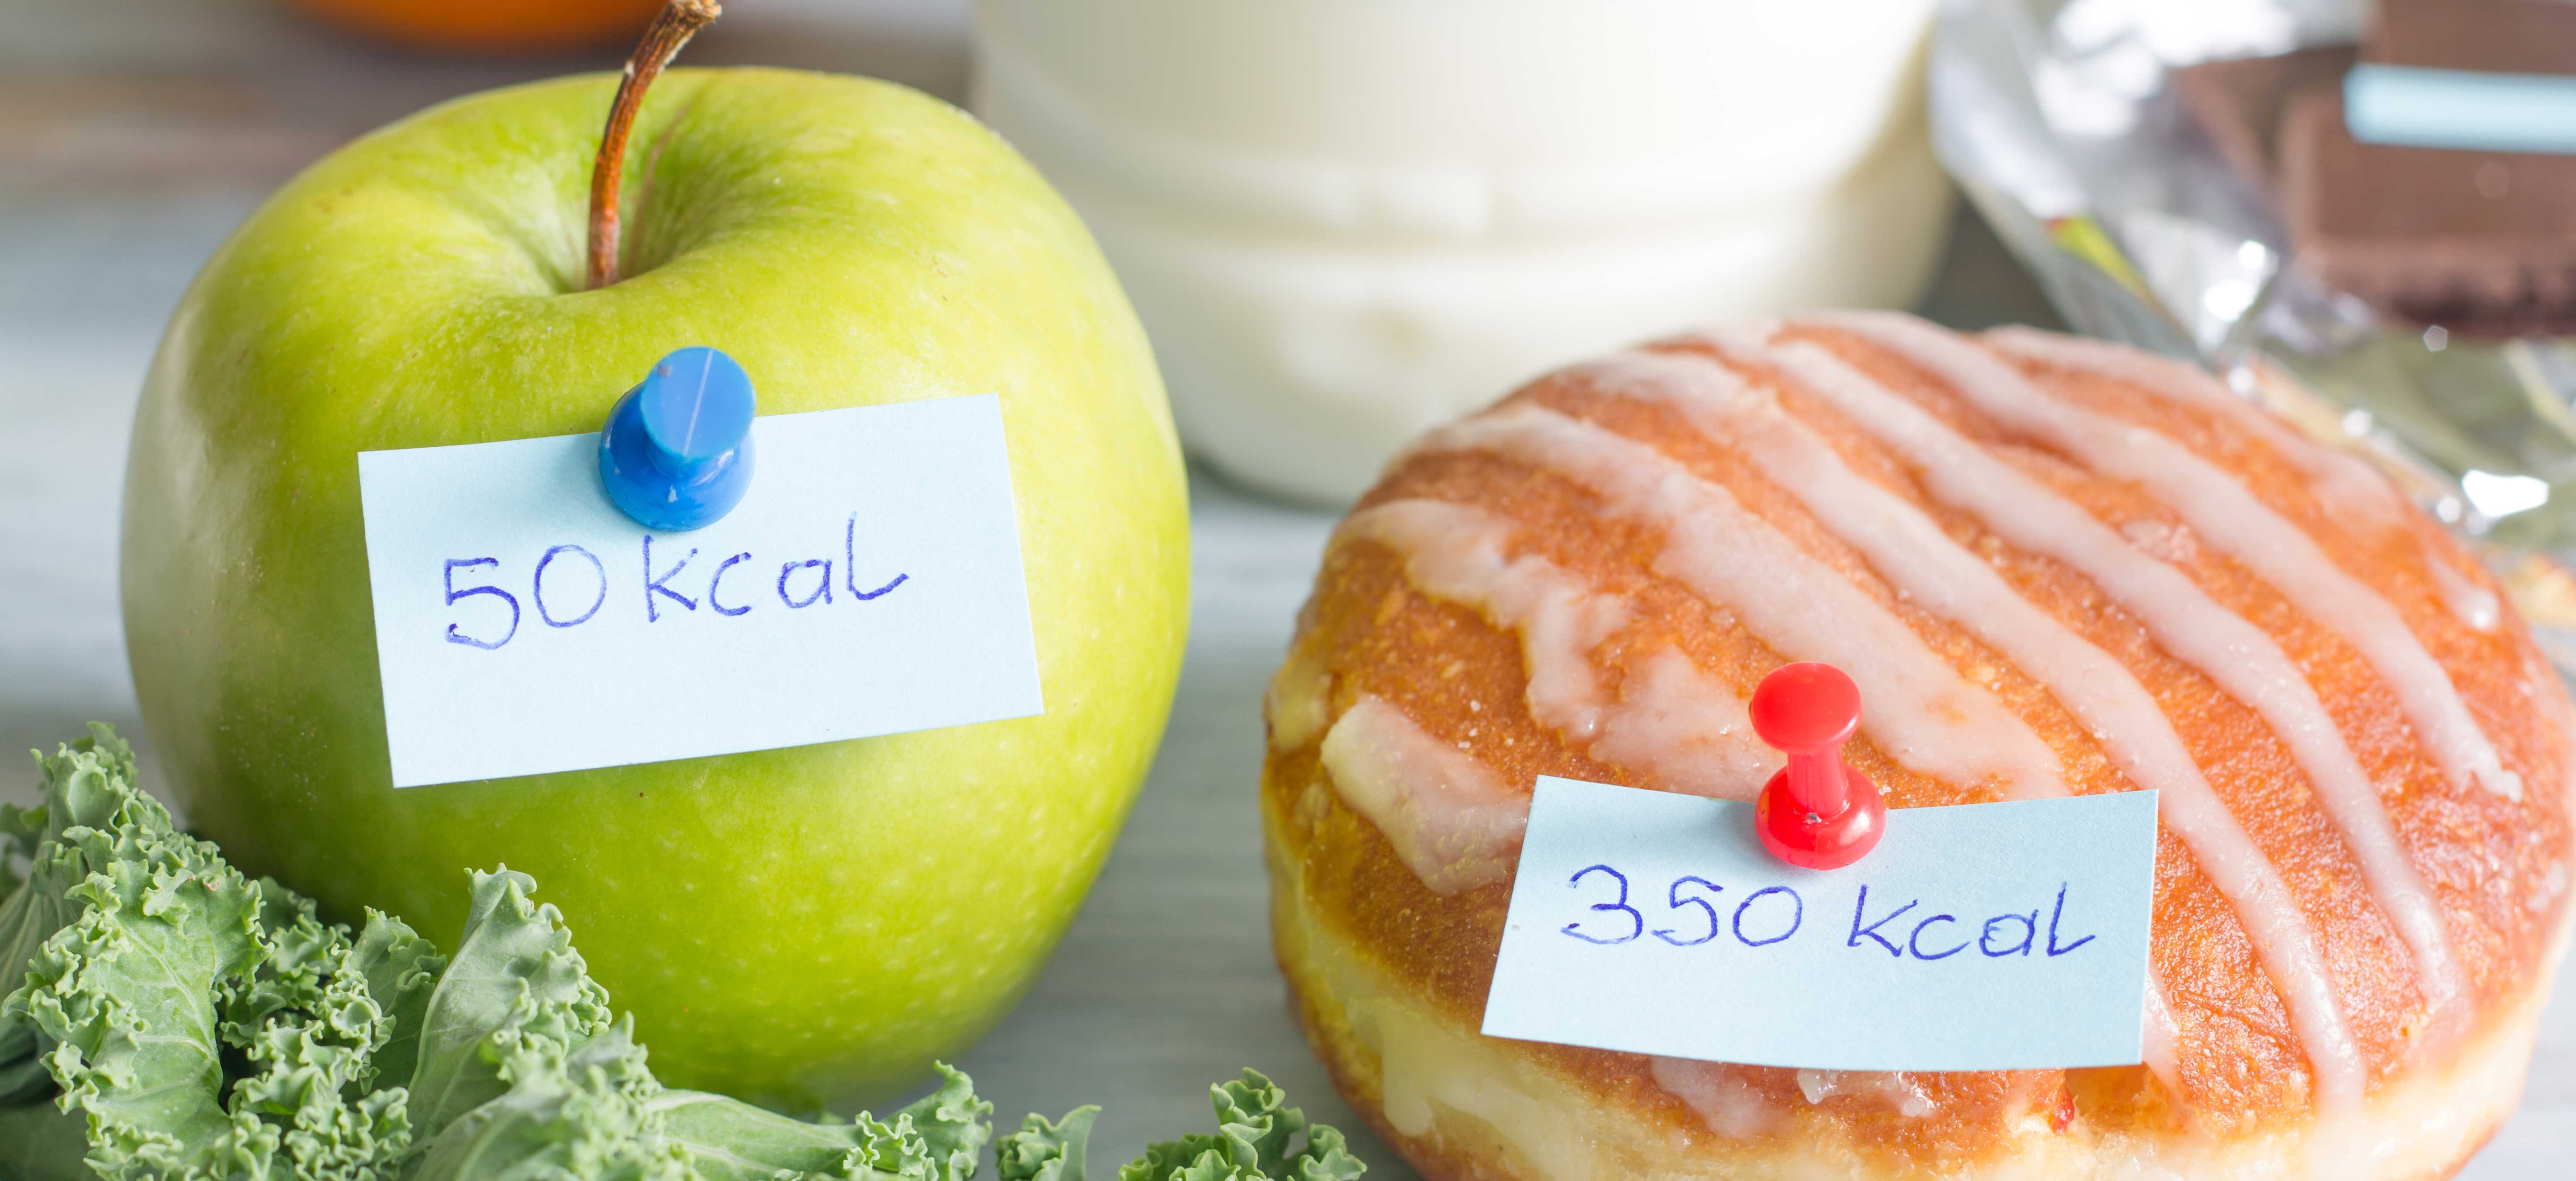 An apple and doughnut with their calorie values pinned to them